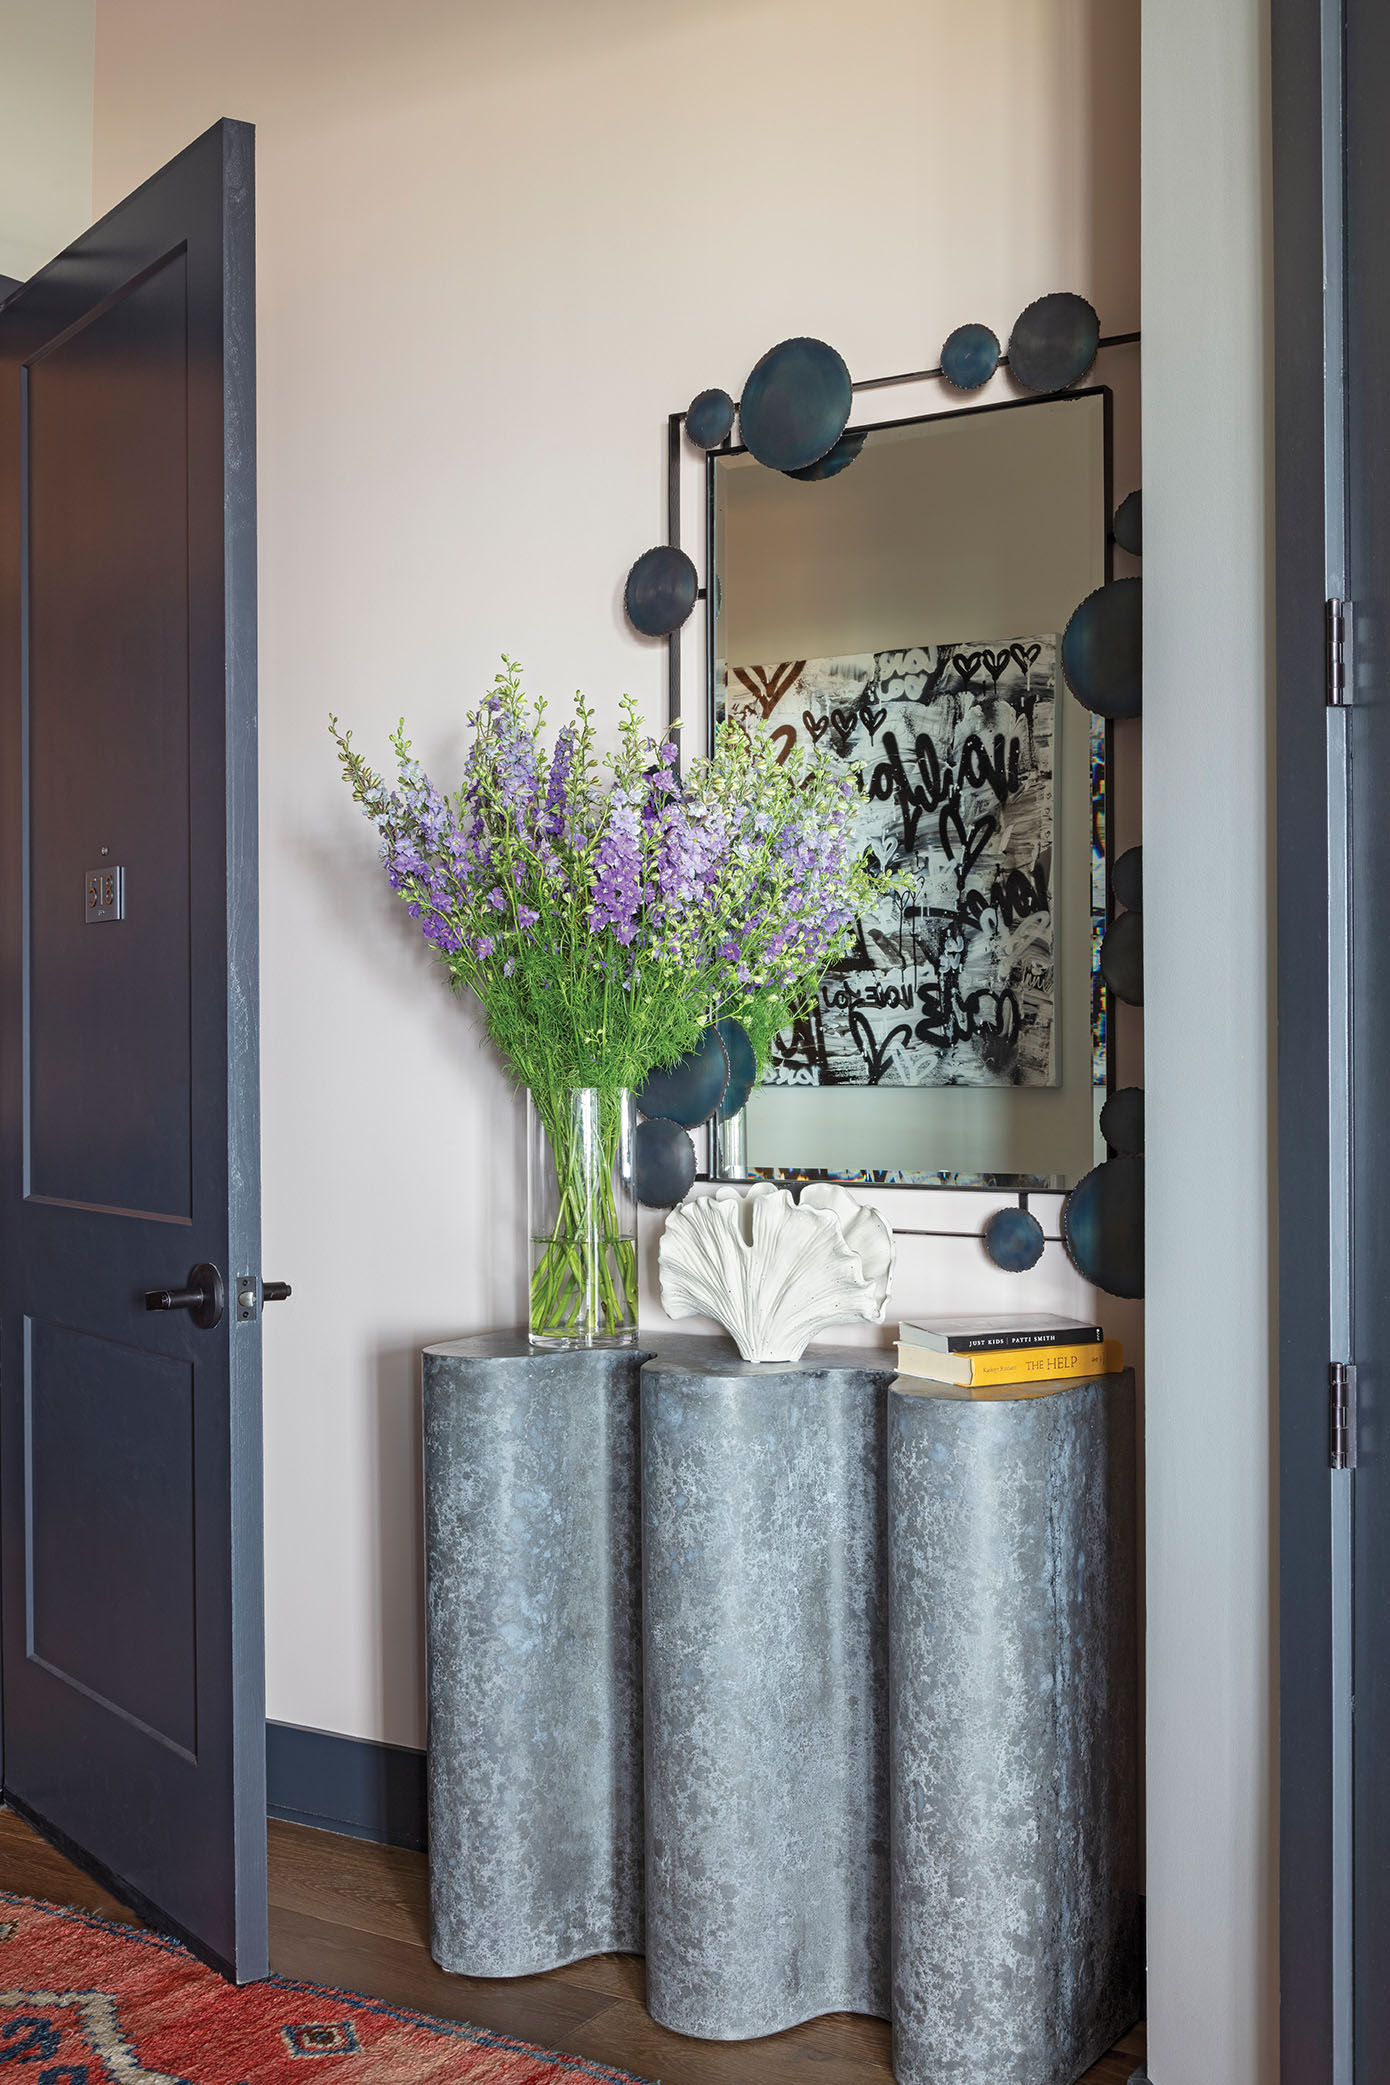 Form fitted: A striking sculptural entry console from Slate Interiors in Charlotte is topped by an Arteriors mirror, reflecting the original artwork by Amber Goldhammer on the opposite wall.